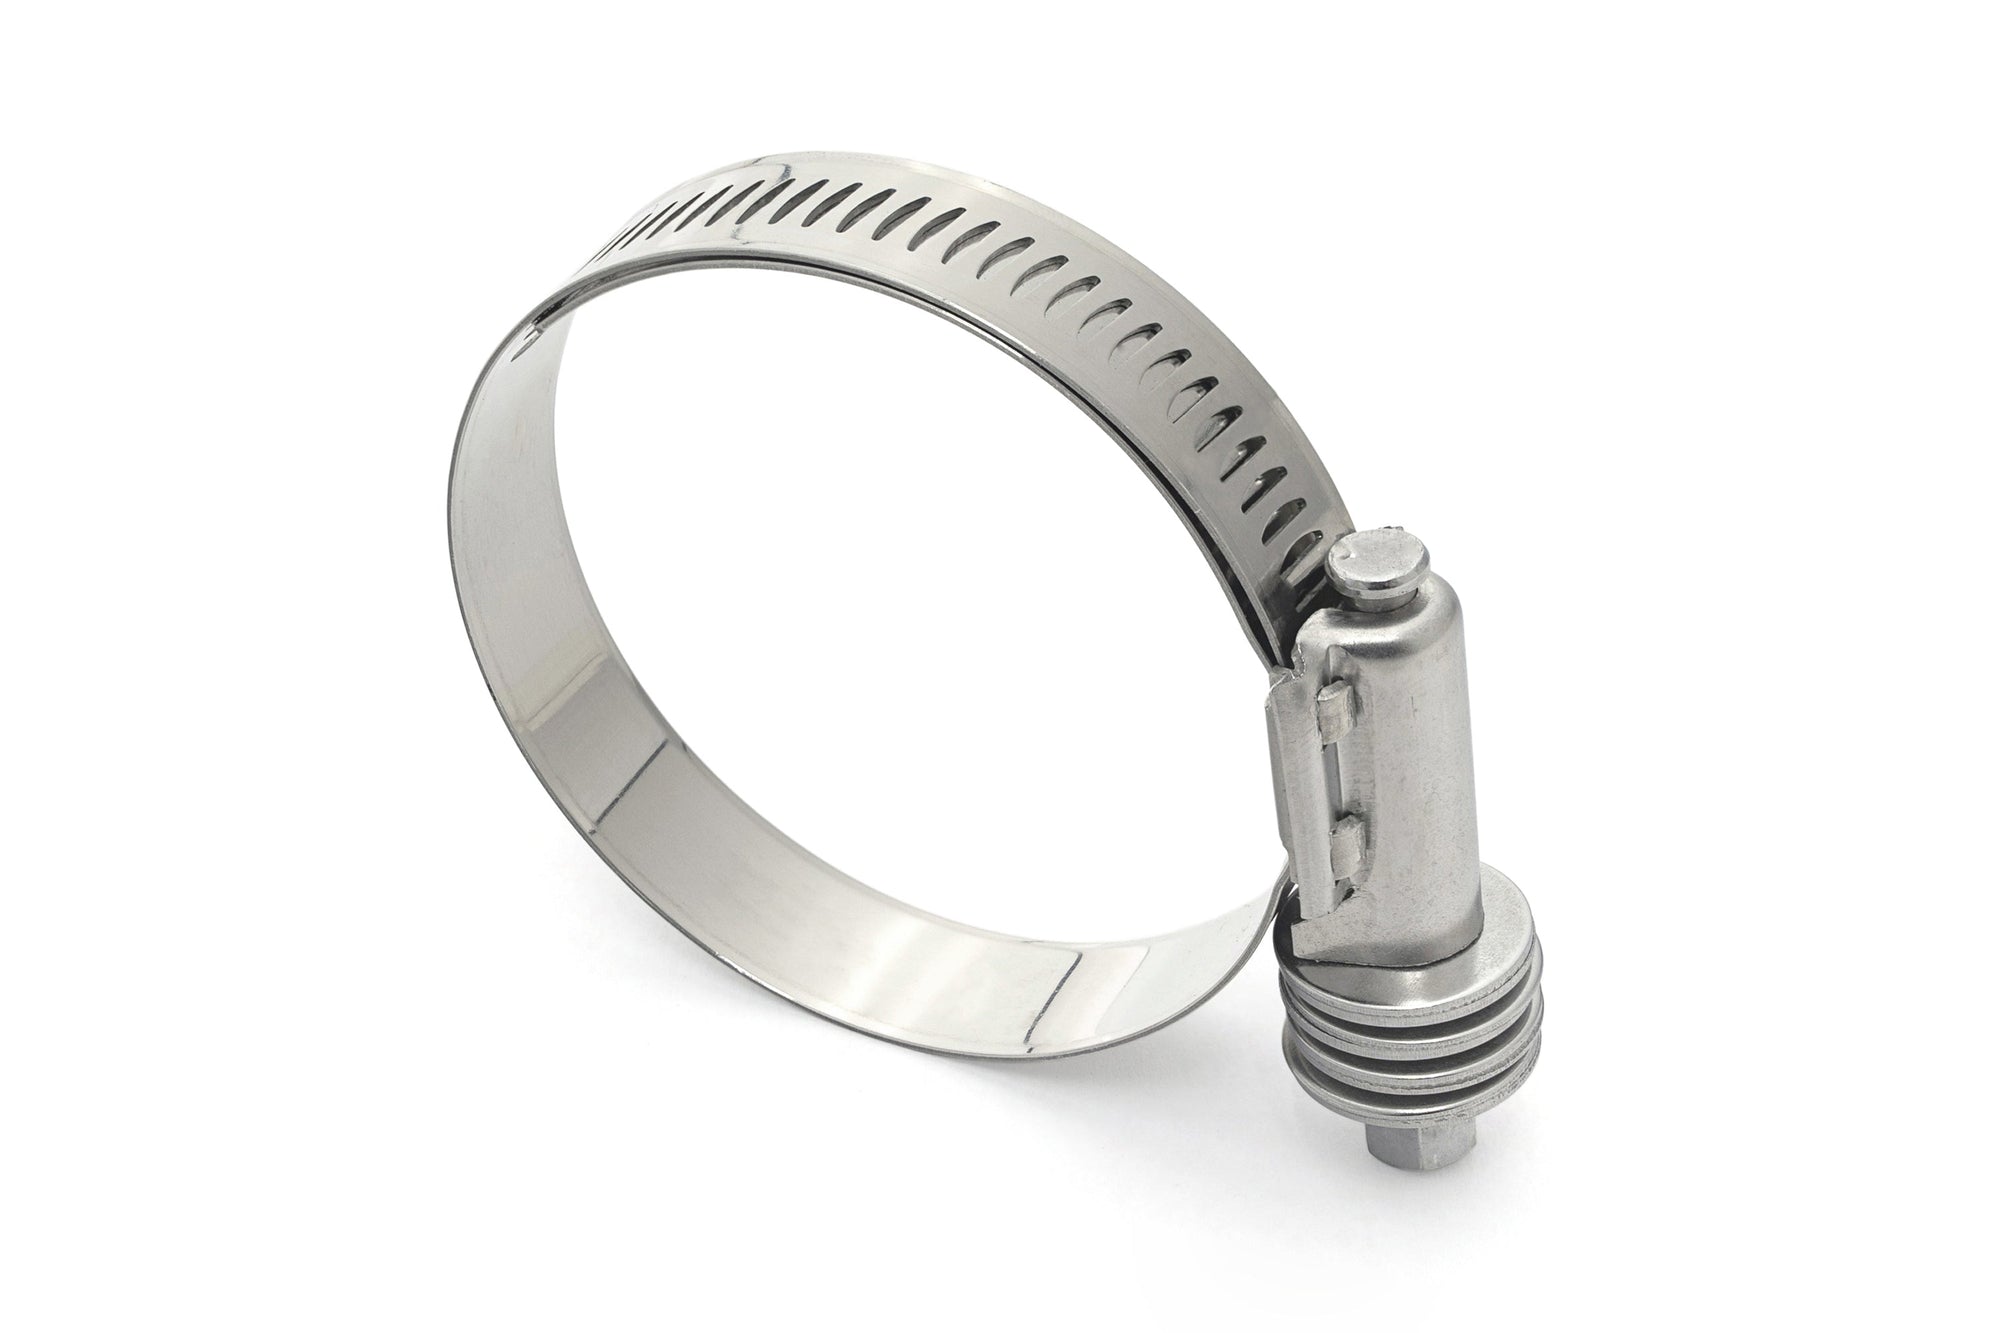 HPS Stainless Steel Heavy Duty Constant Torque Hose Clamp Size # 662 CTHD-662 5.75 - 6.62 inch 146mm - 168mm